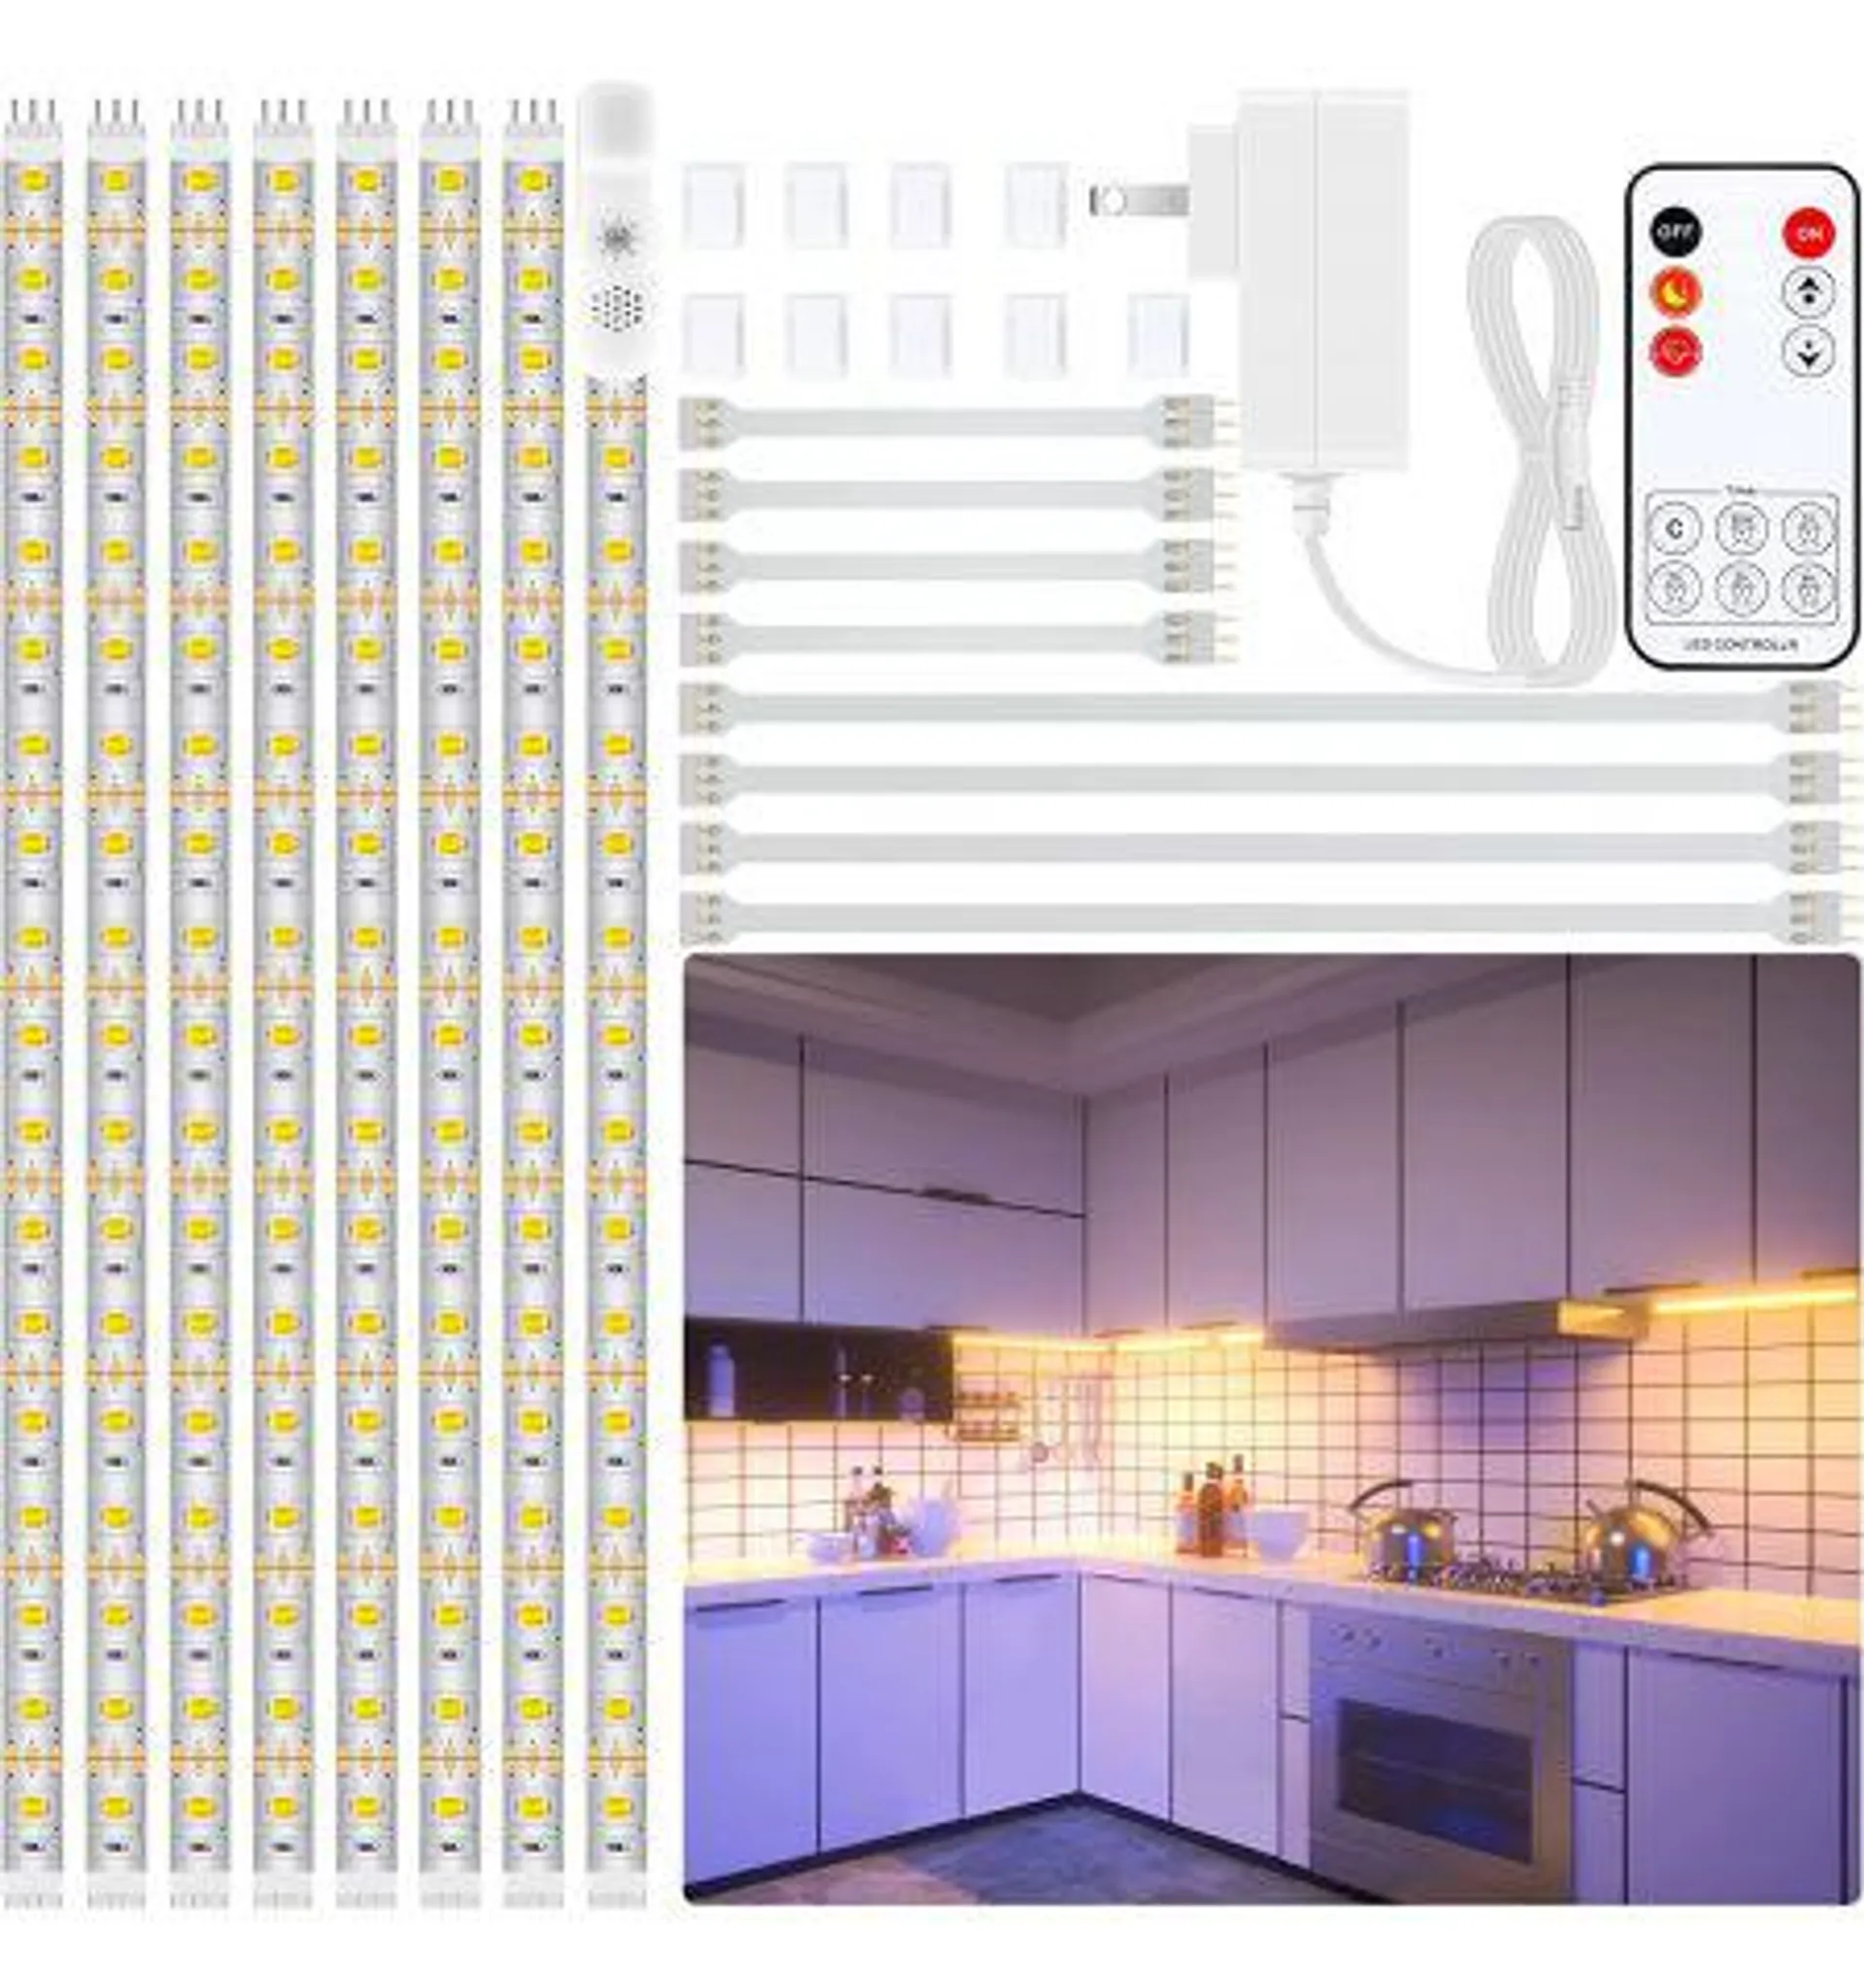 13ft Under Cabinet Led Strip Lighting with Remote